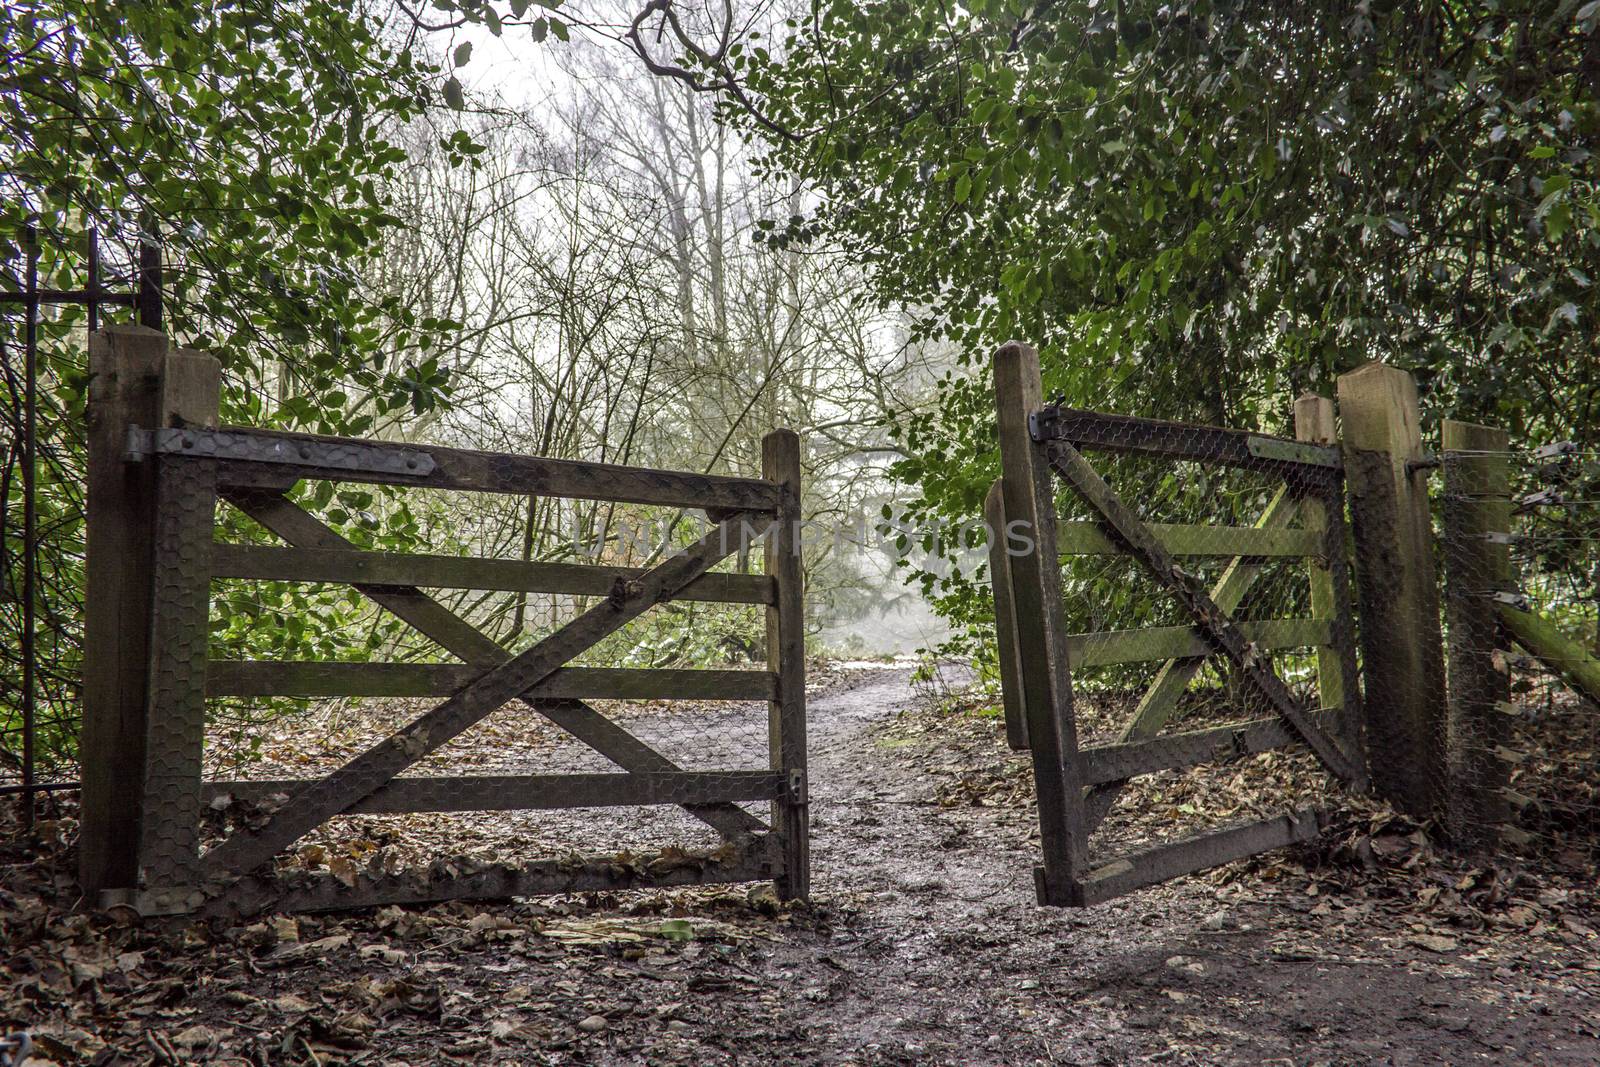 An open wooden gate in a forest or wood with a path on the other side leading into the distance towards a misty opening